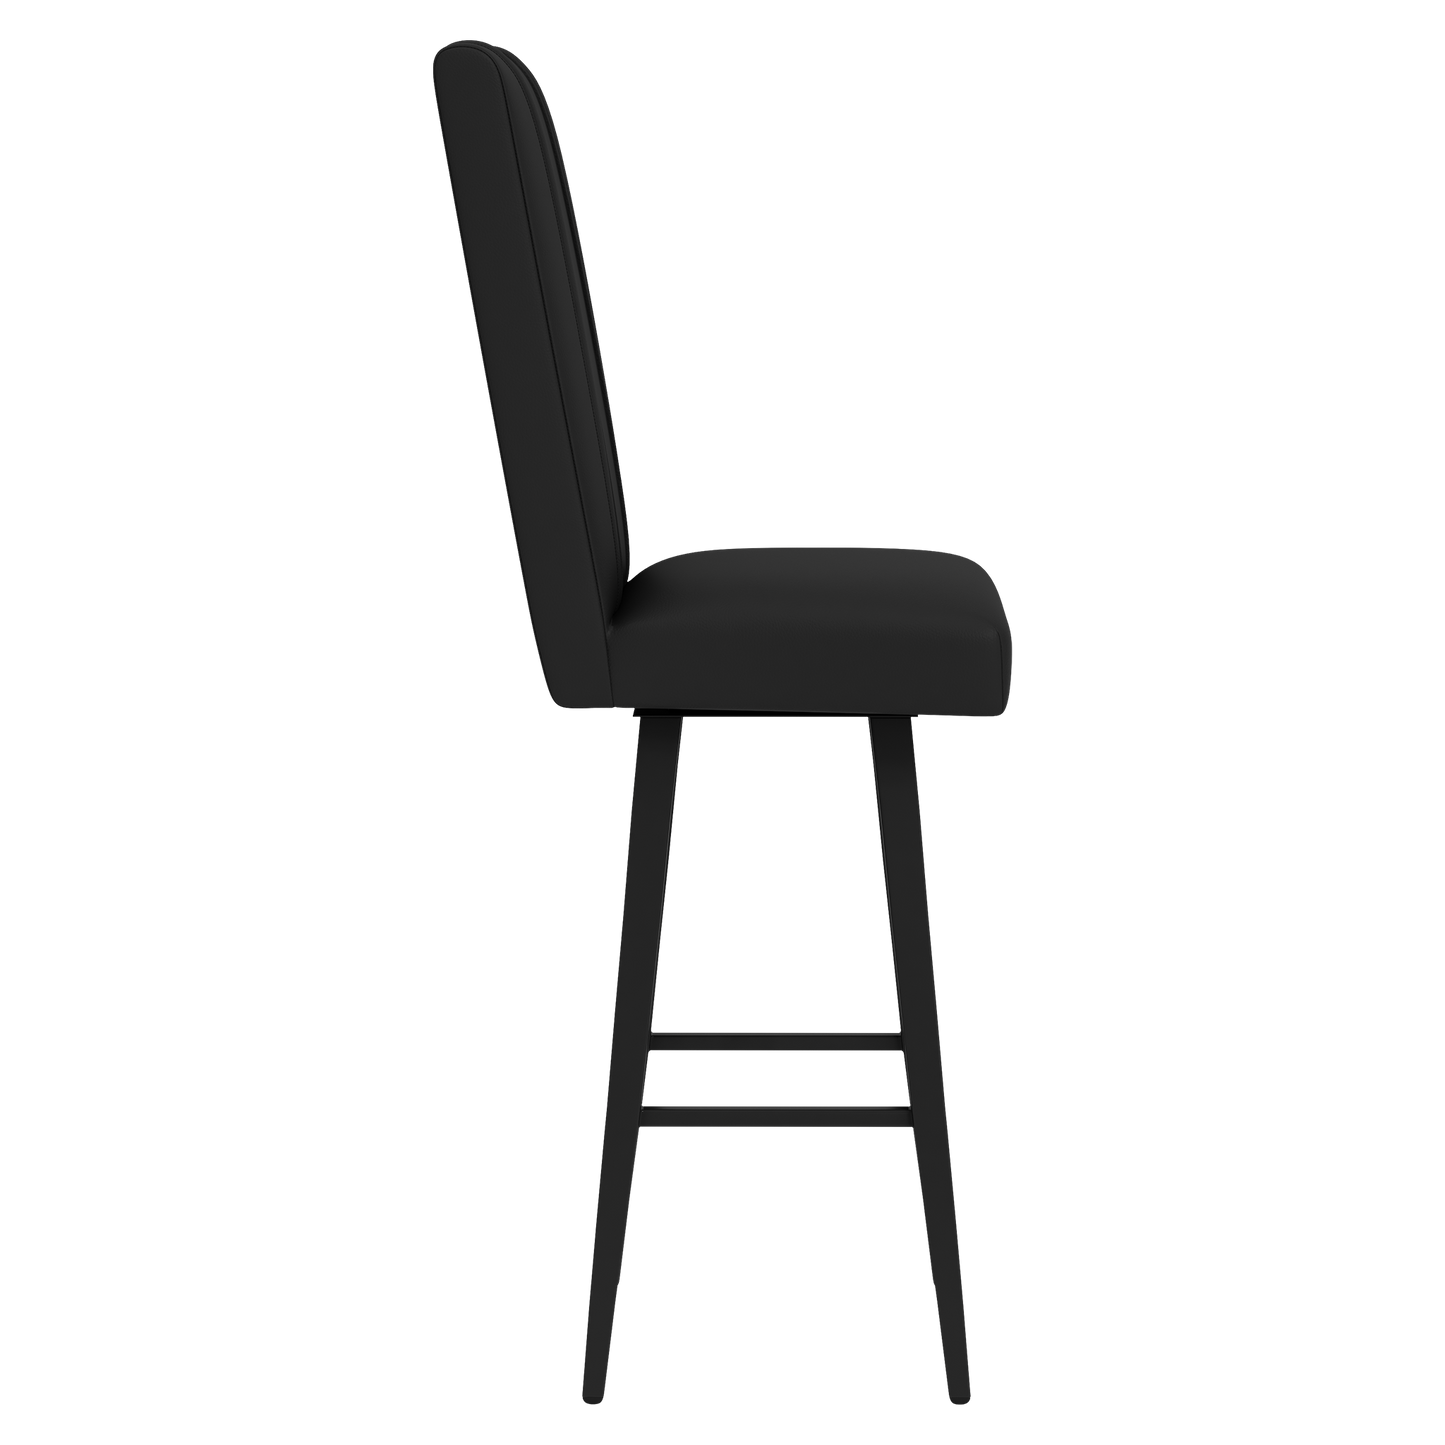 Swivel Bar Stool 2000 with Celtics Crossover Gaming Wordmark White [CAN ONLY BE SHIPPED TO MASSACHUSETTS]